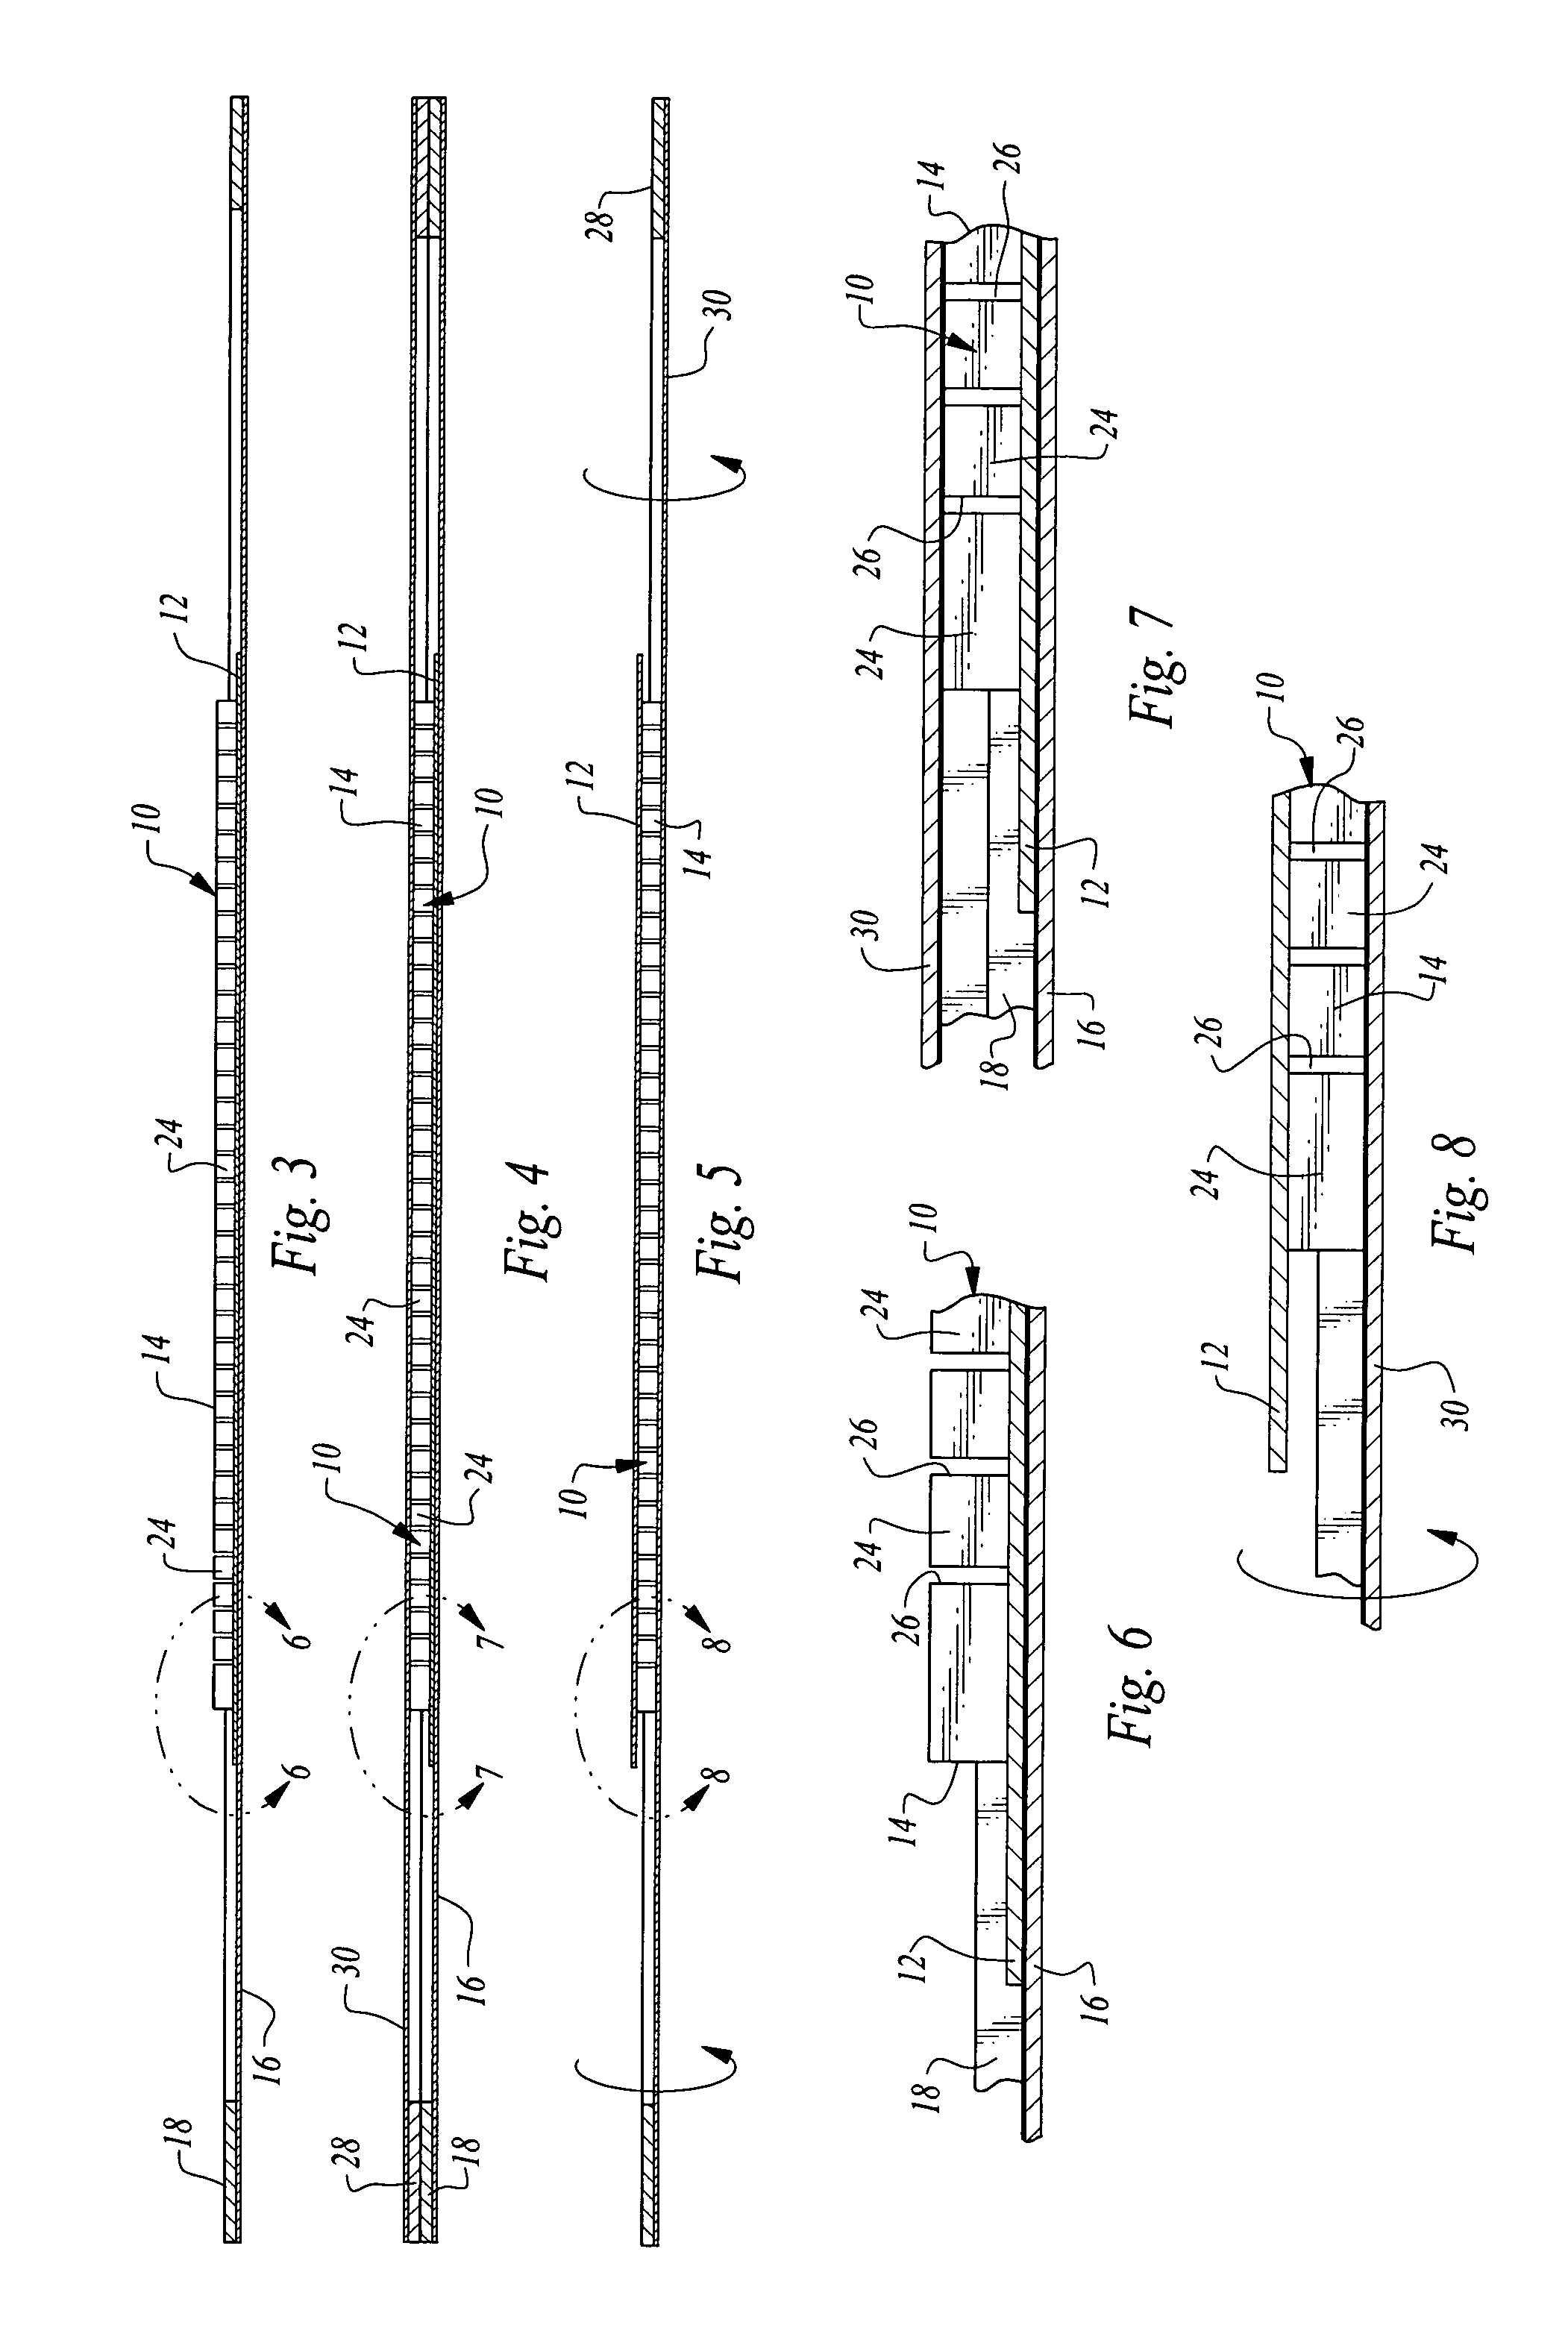 Method of removing back metal from an etched semiconductor scribe street